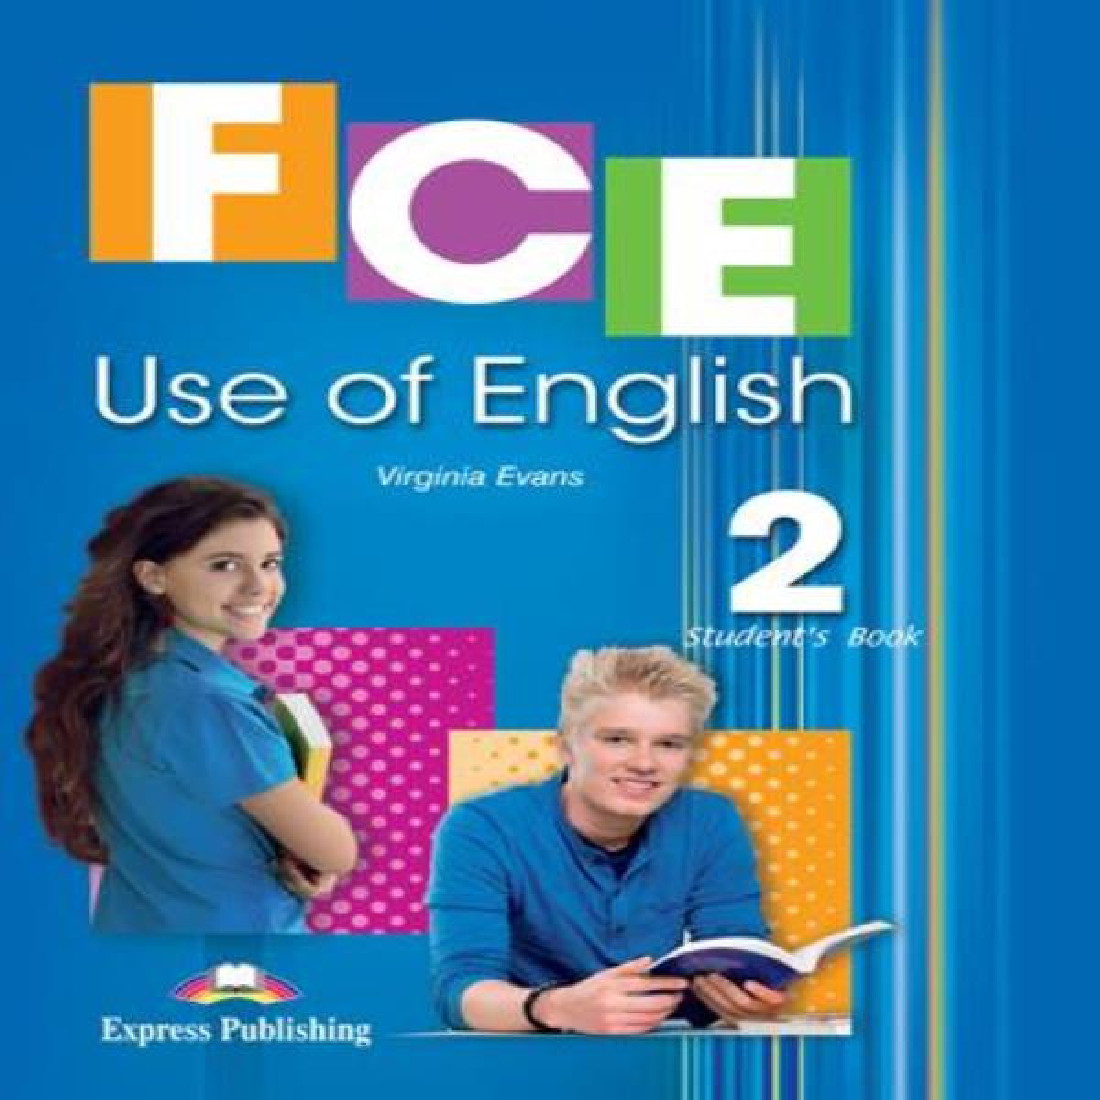 FCE USE OF ENGLISH 2 STUDENTS BOOK REVISED 2015